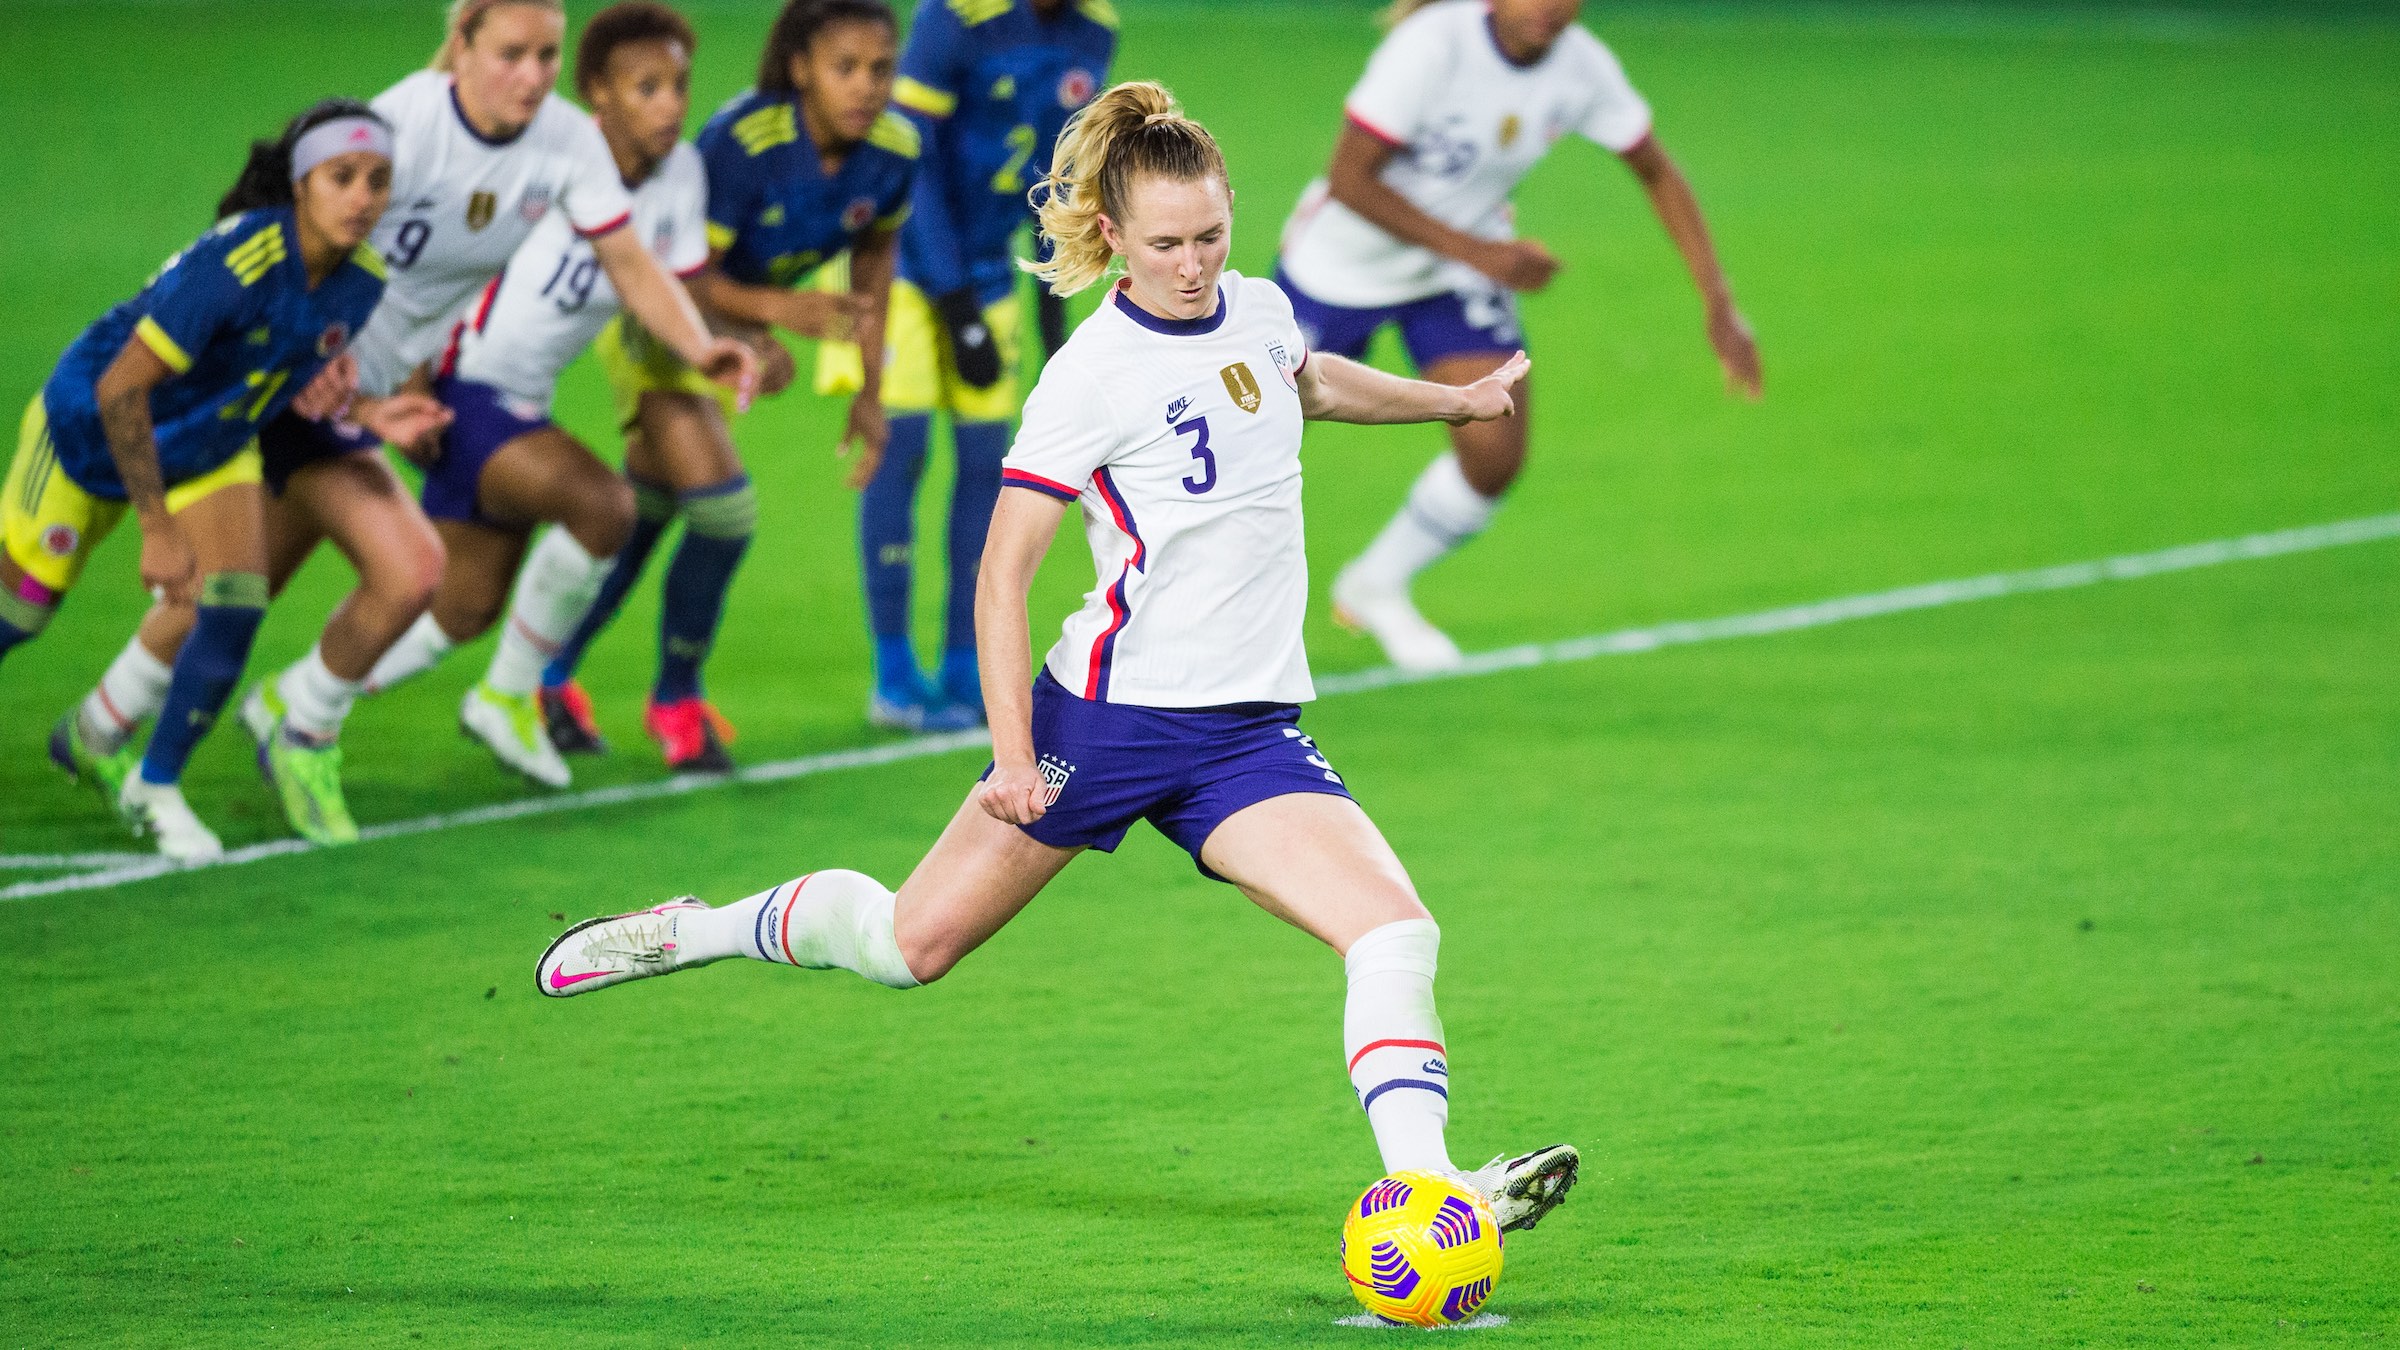 Sam Mewis hat trick propels USWNT to 40 win over Colombia SoccerWire